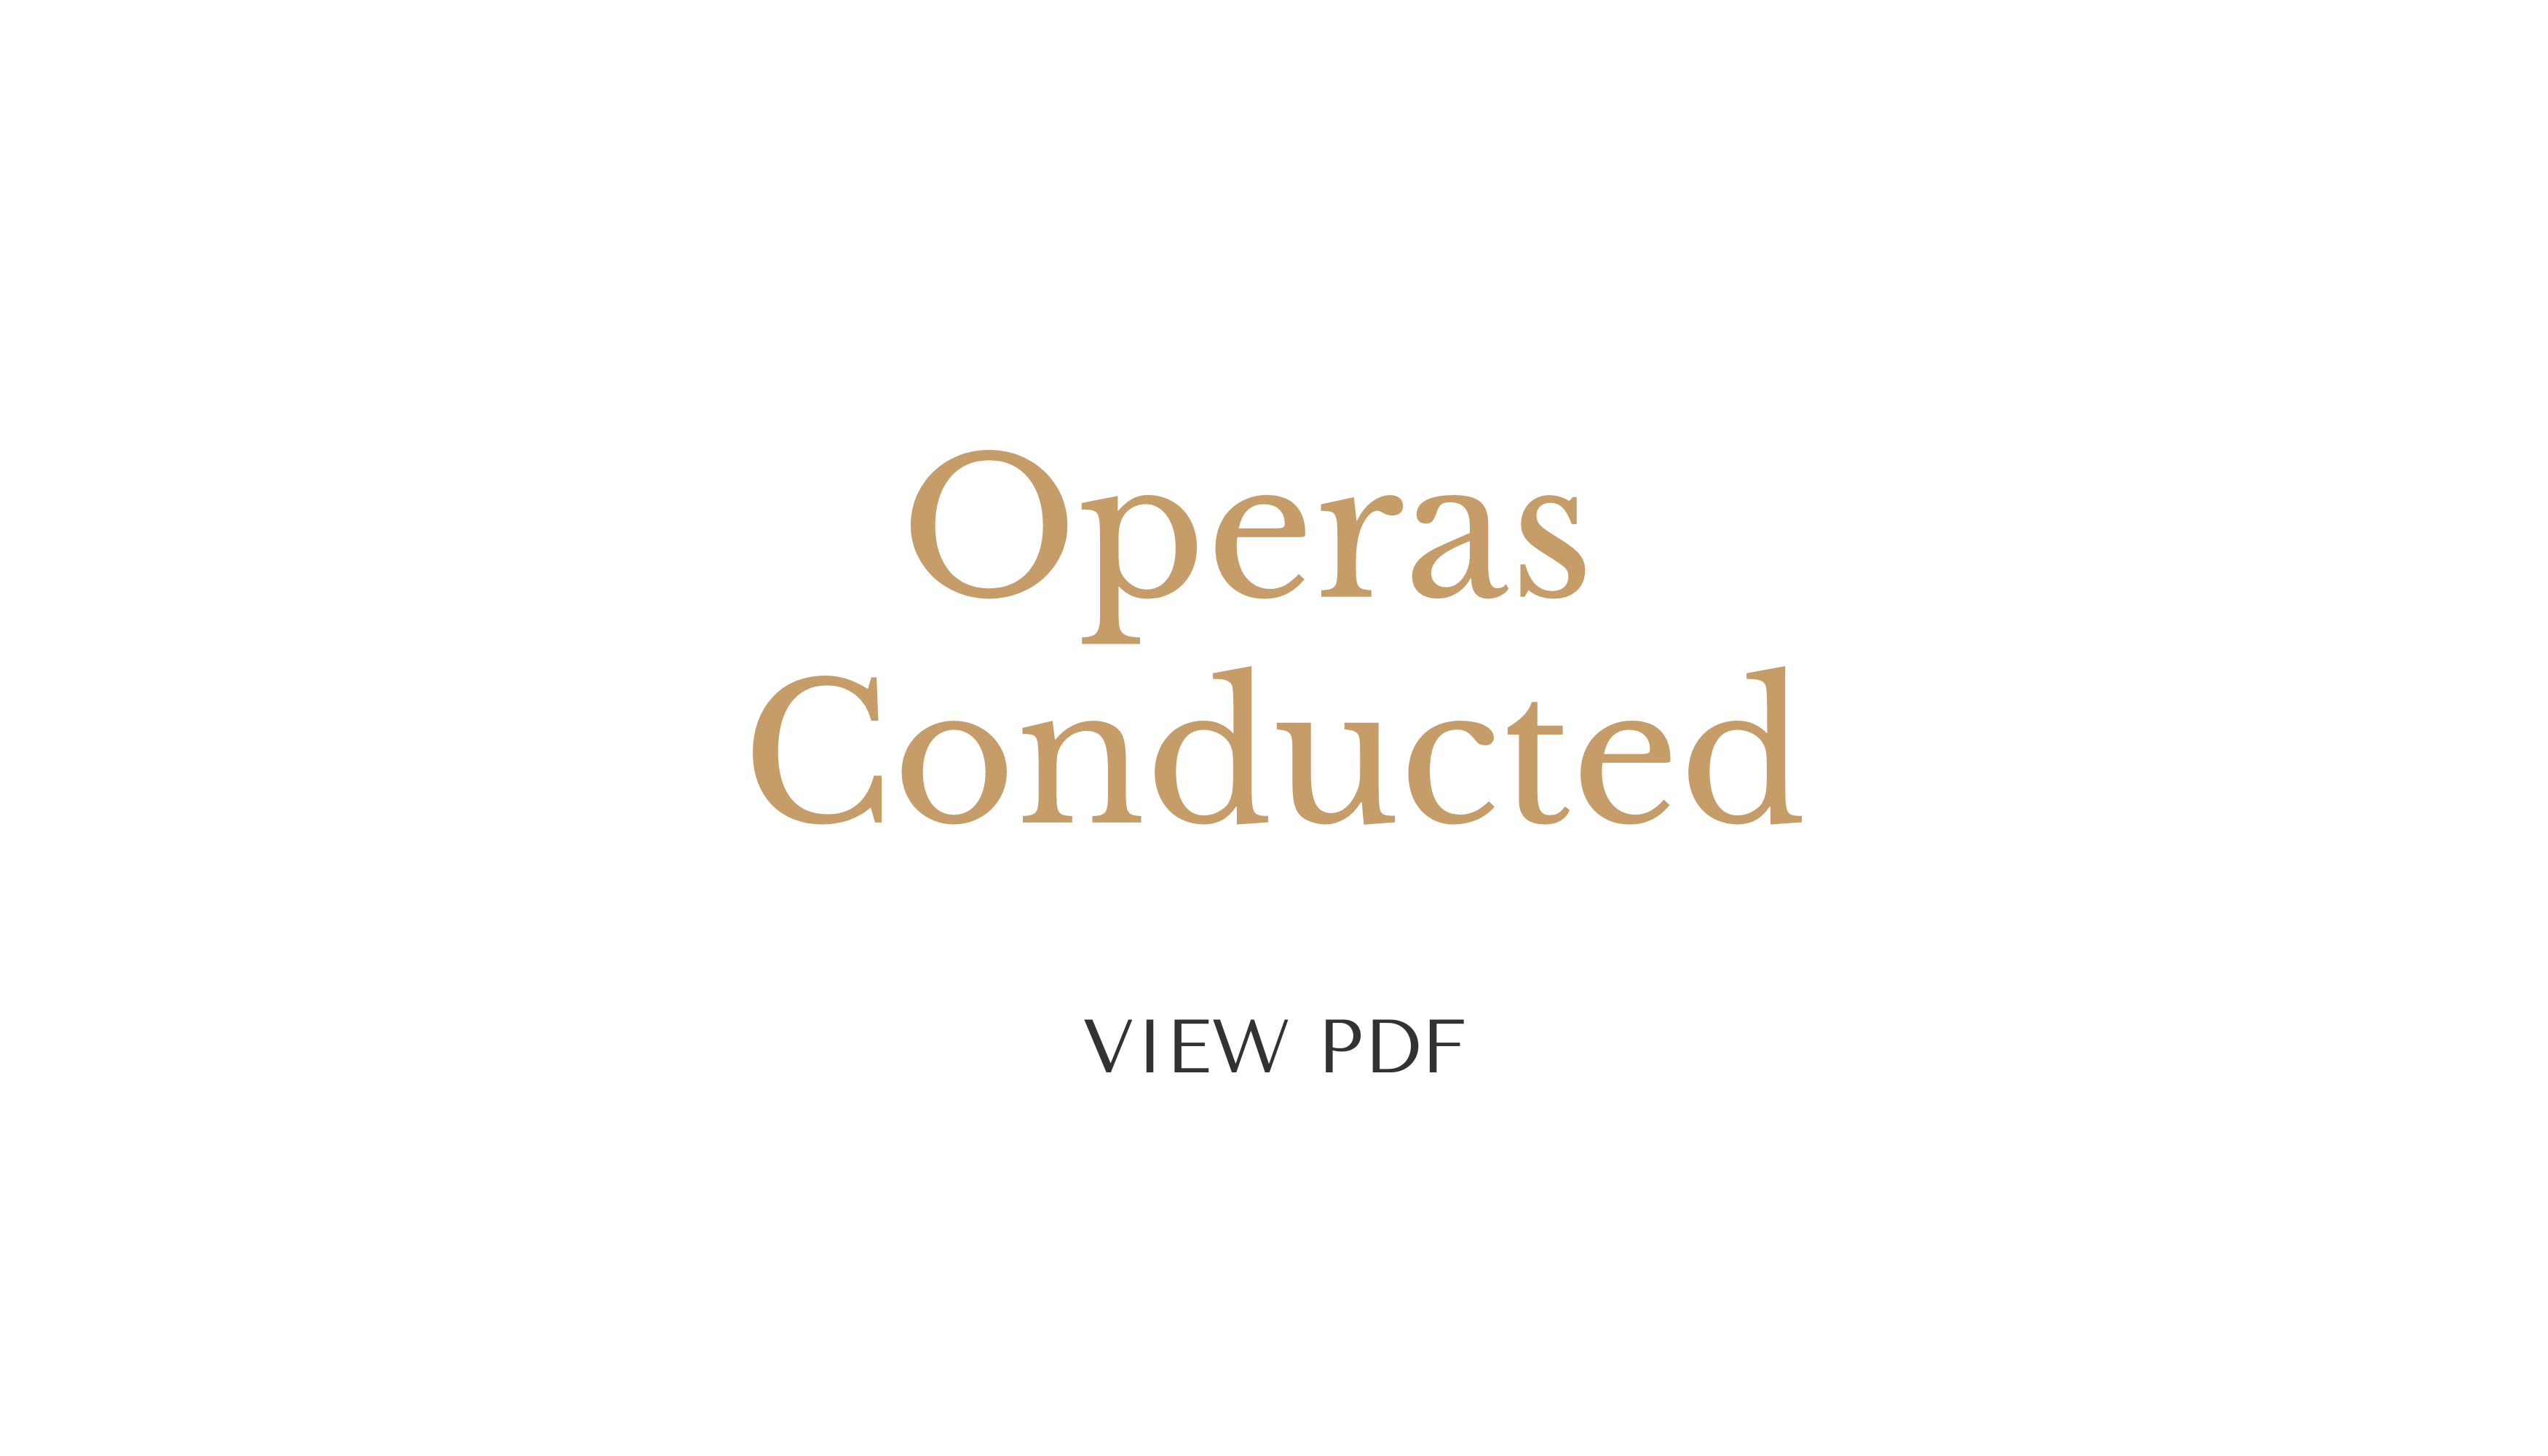 Operas Conducted